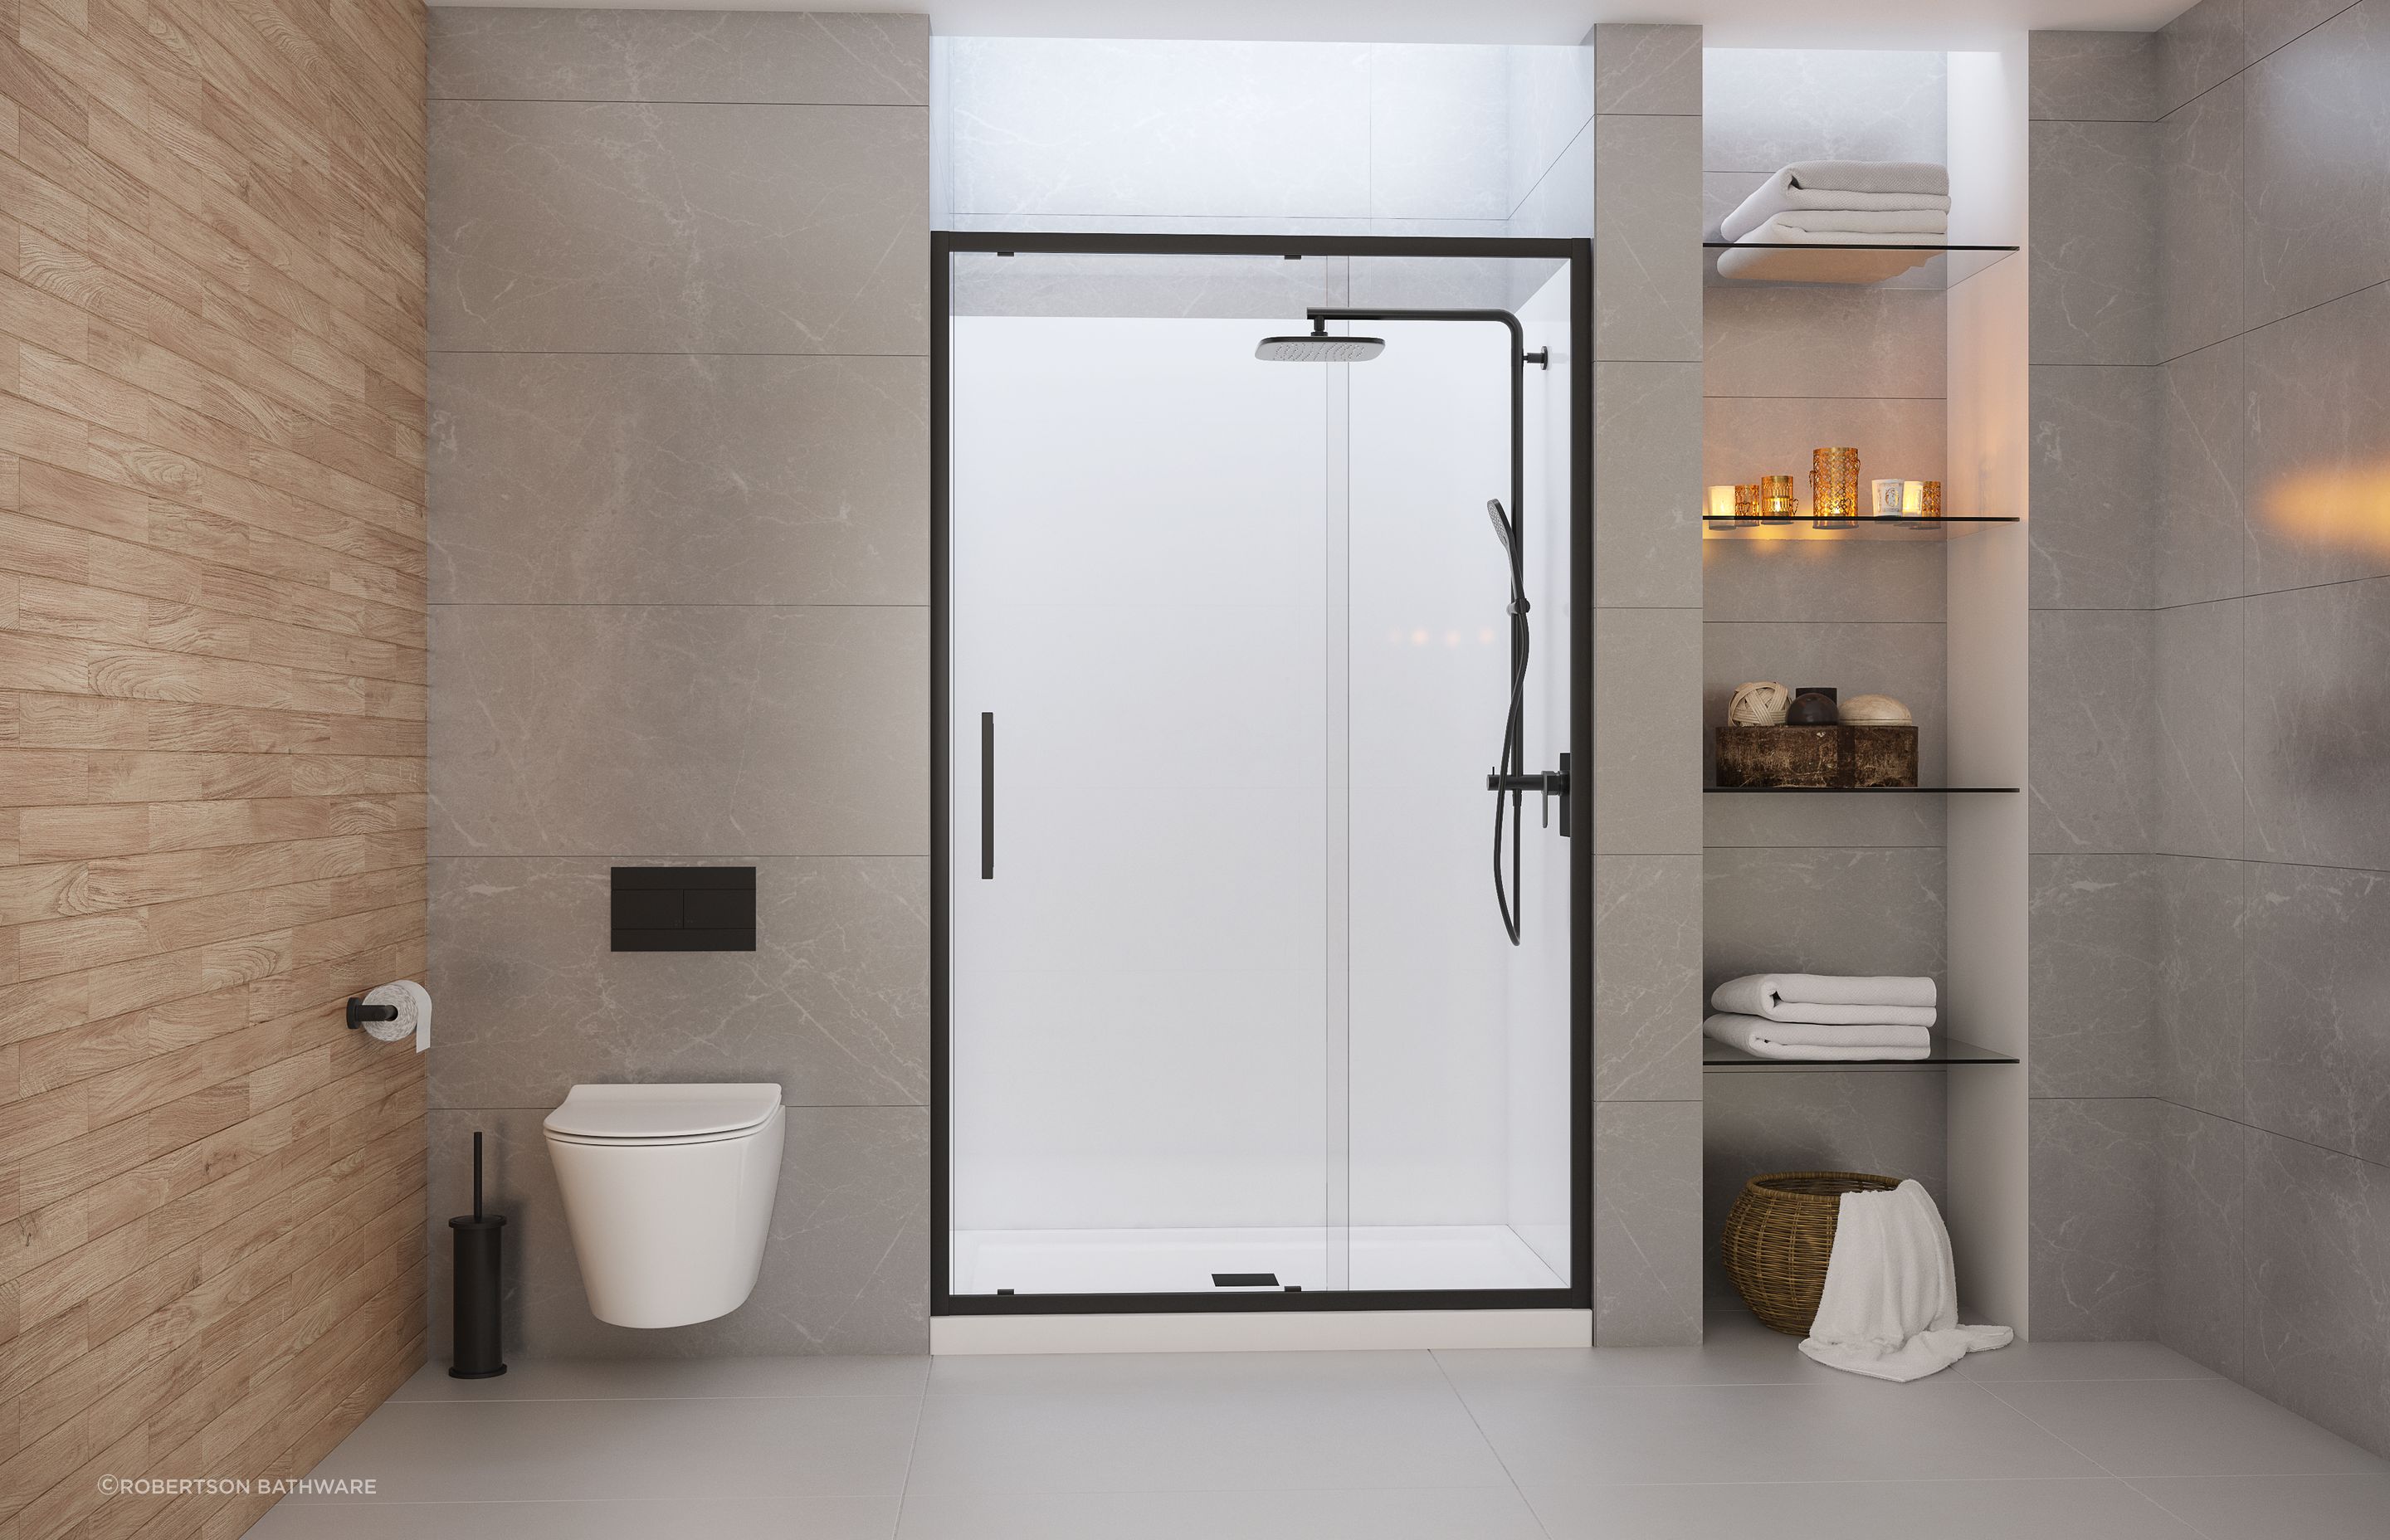 The Evolve Over Height Shower Enclosure with premium fittings for a luxurious showering experience